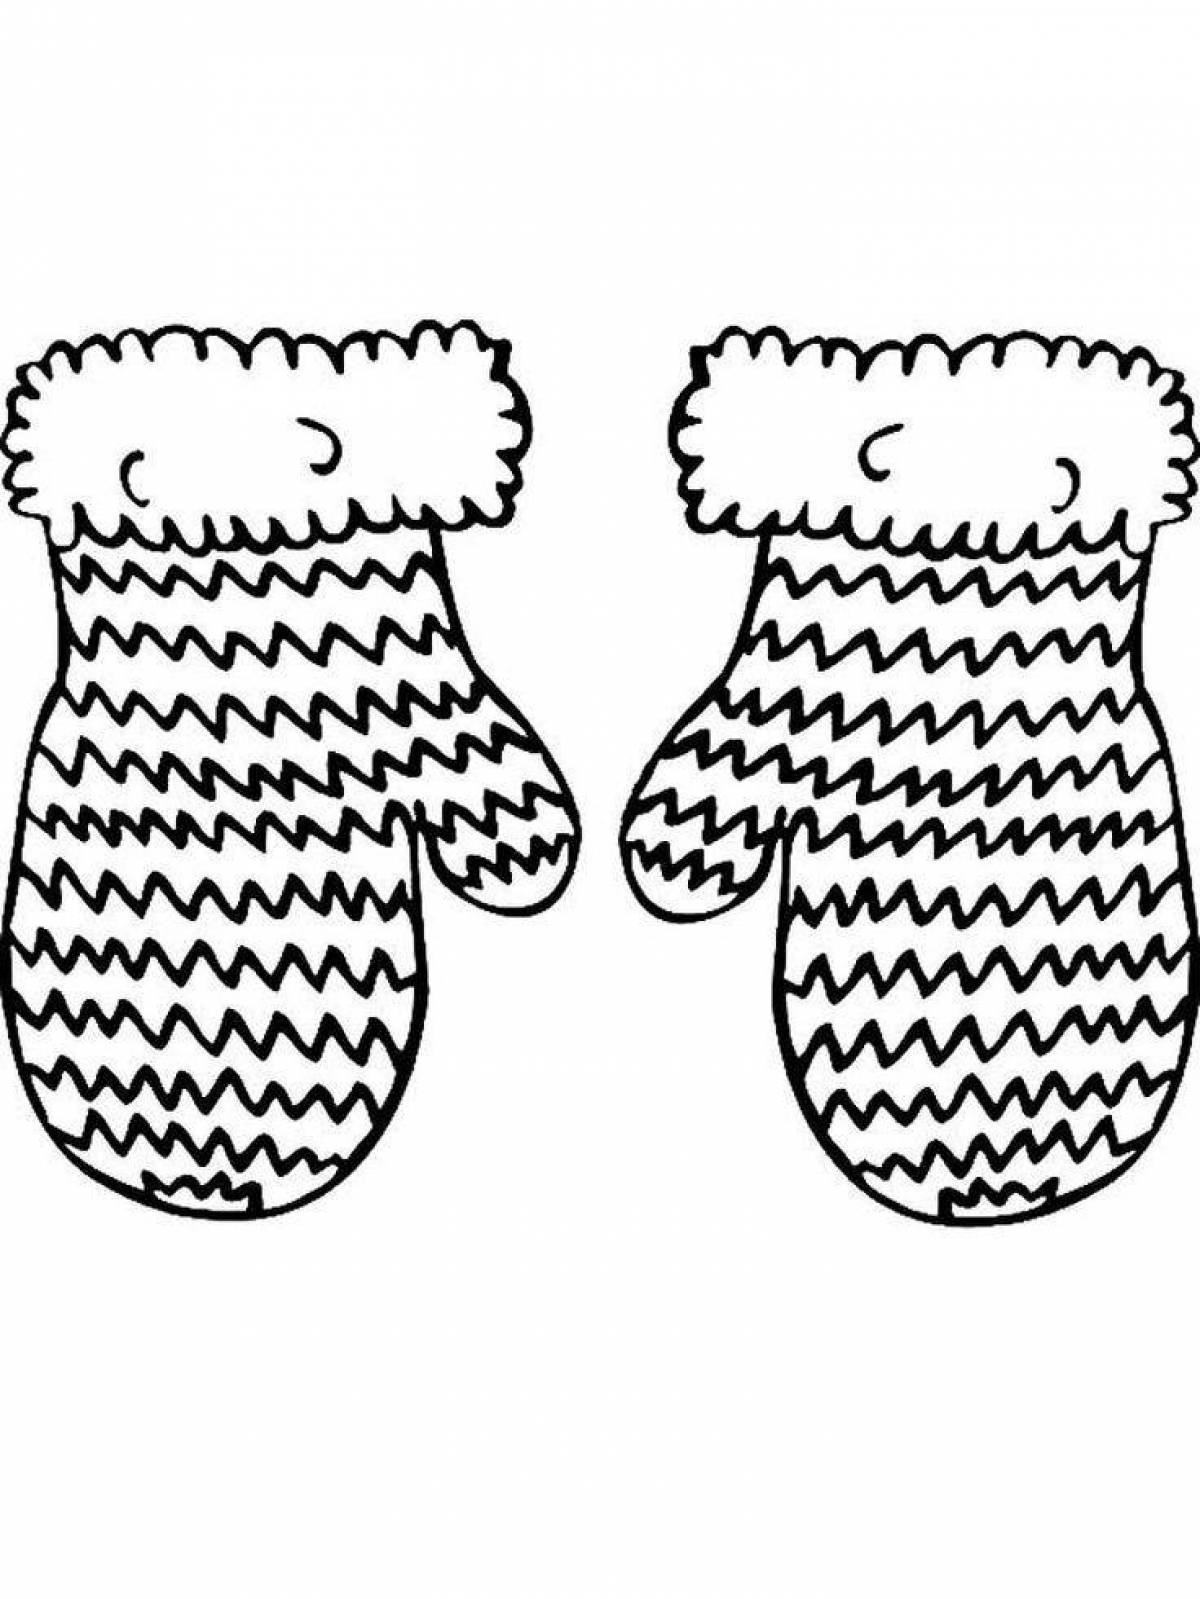 Shining mittens coloring book for 3-4 year olds